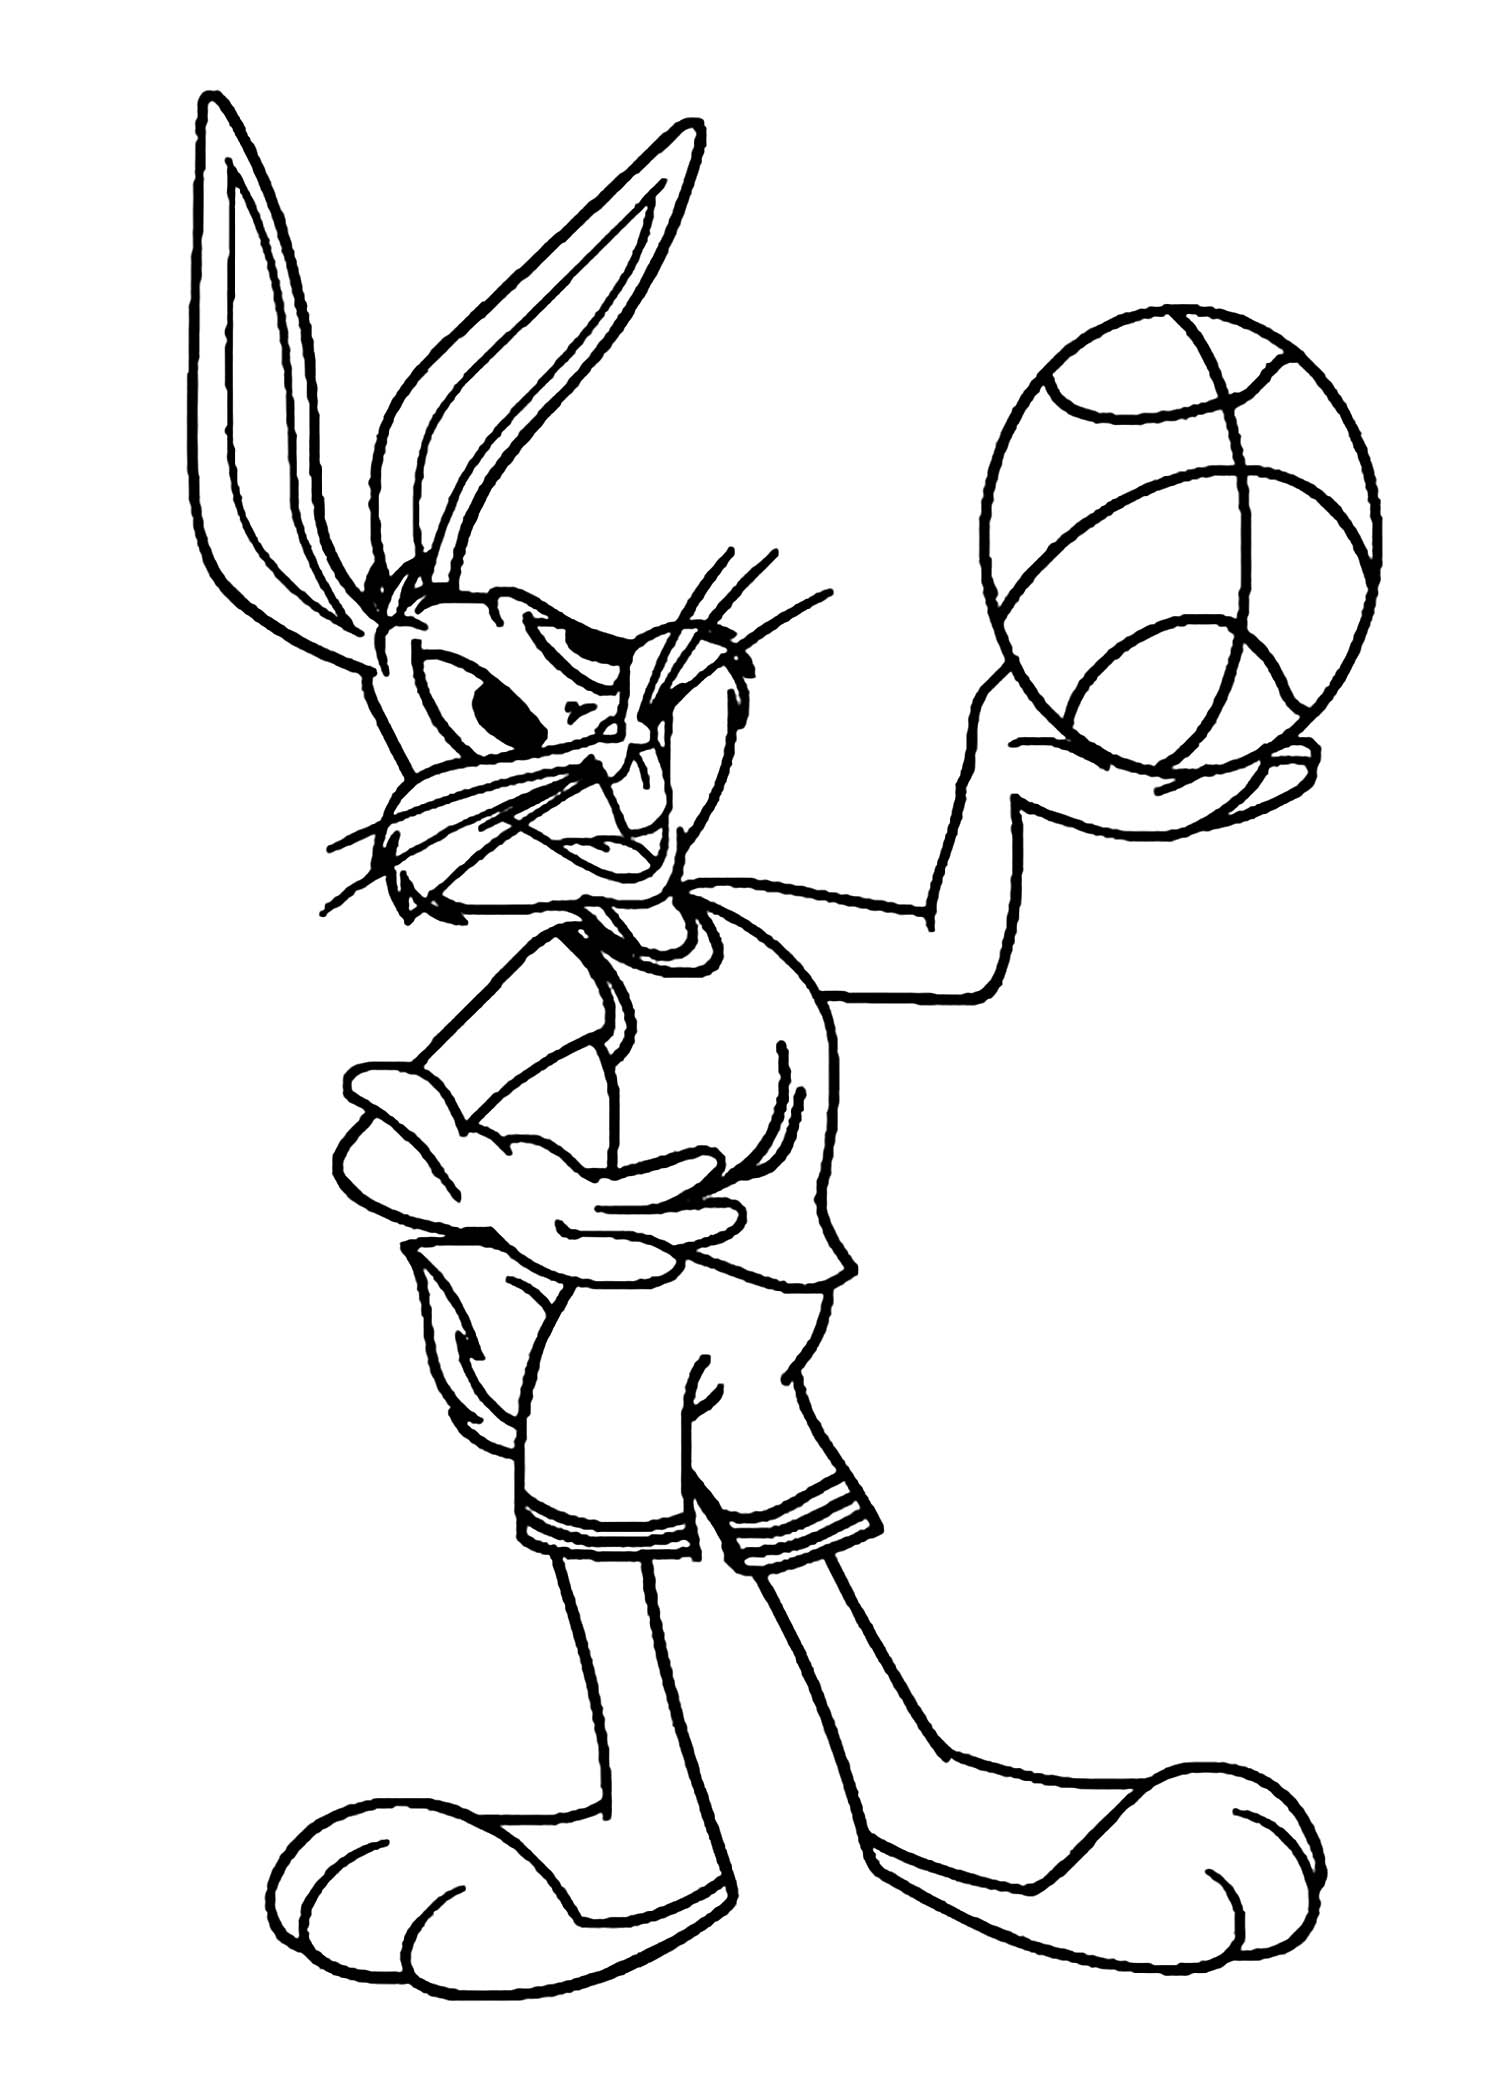 Download Basketball for kids - Basketball Kids Coloring Pages